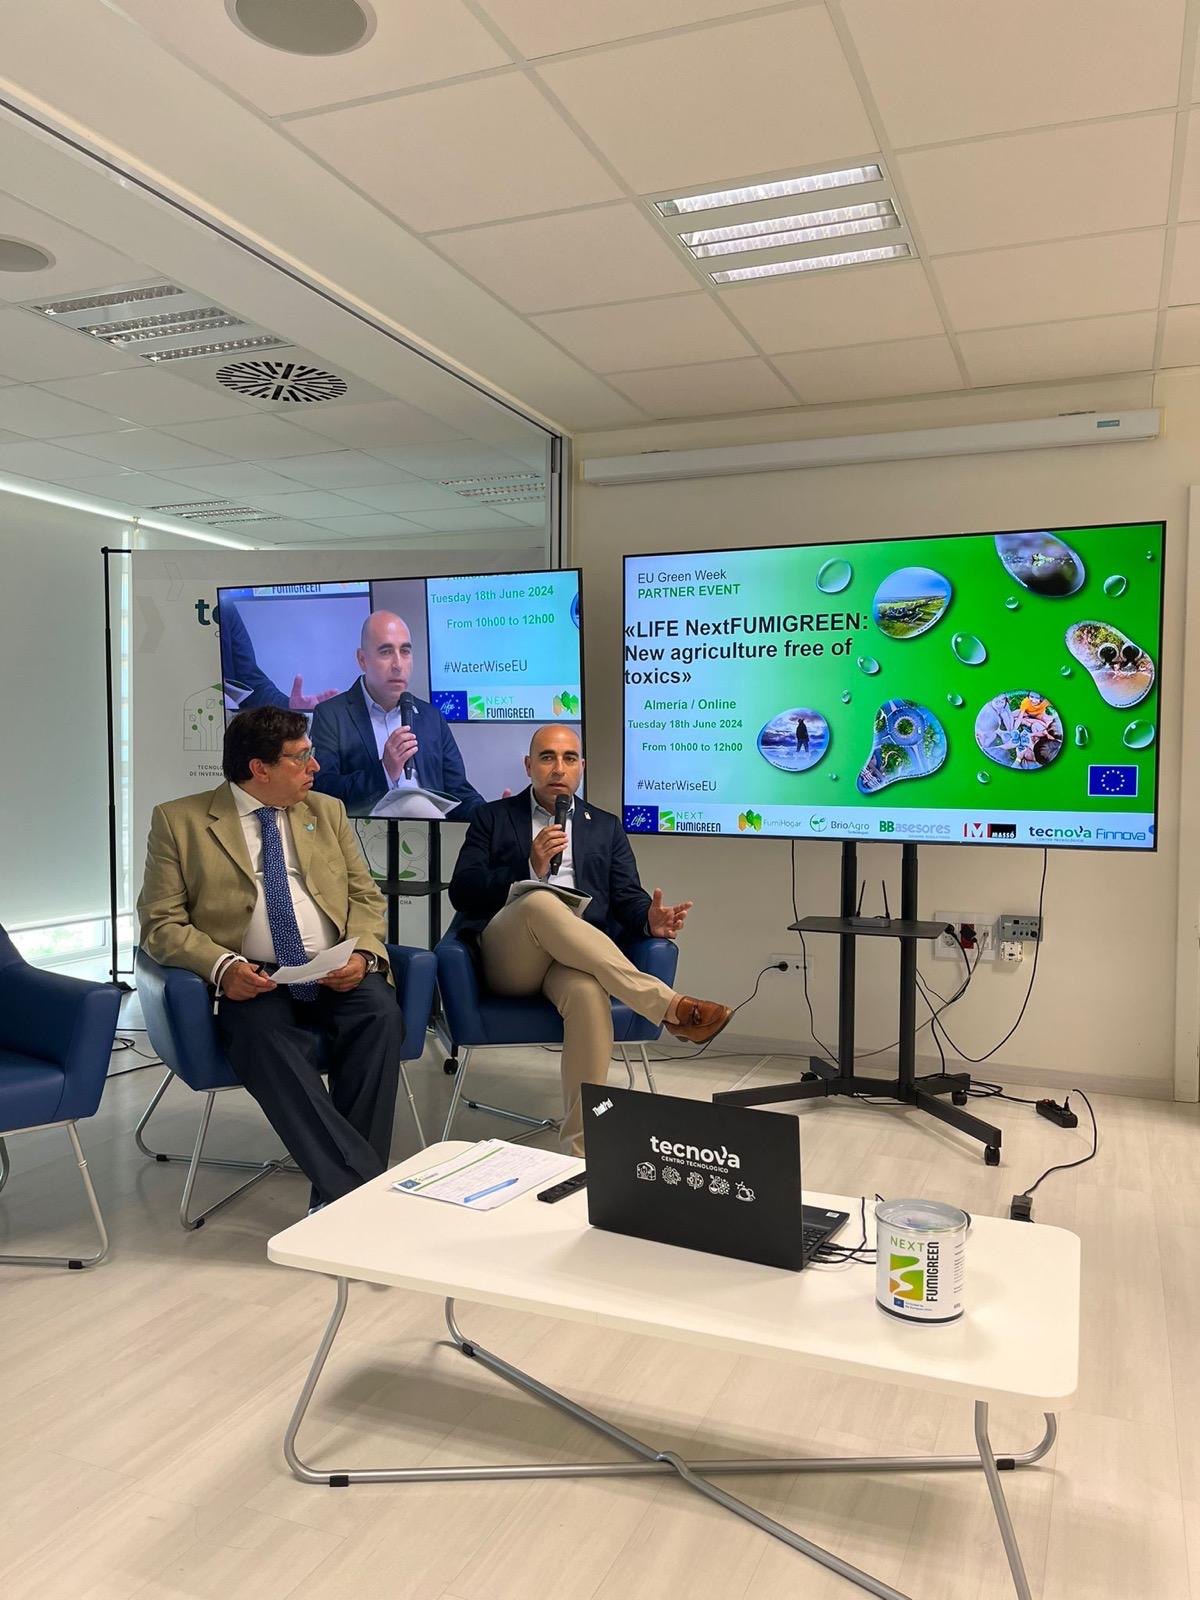 “Almeria is a leading province in the sustainable use of water and chemical products without any alert, something that differentiates us from other producers outside the EU”